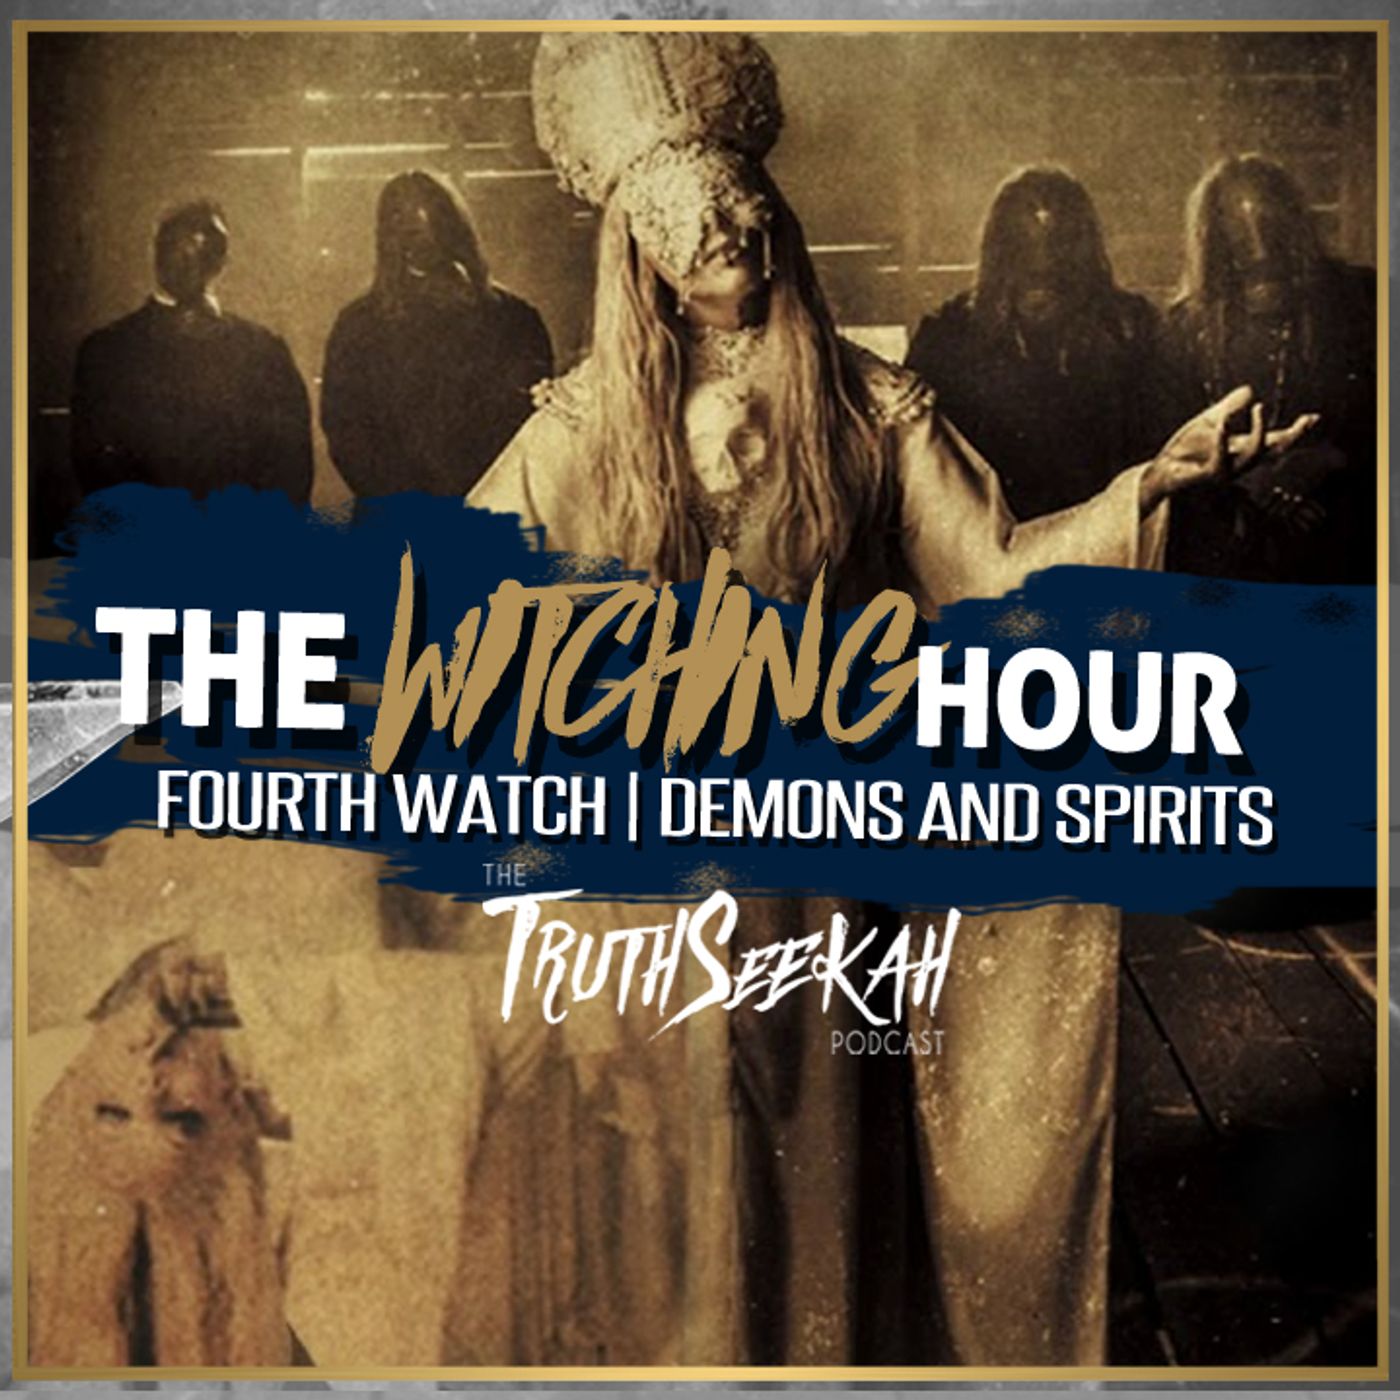 The Witching Hour | Fourth Watch | Demons and Spirits